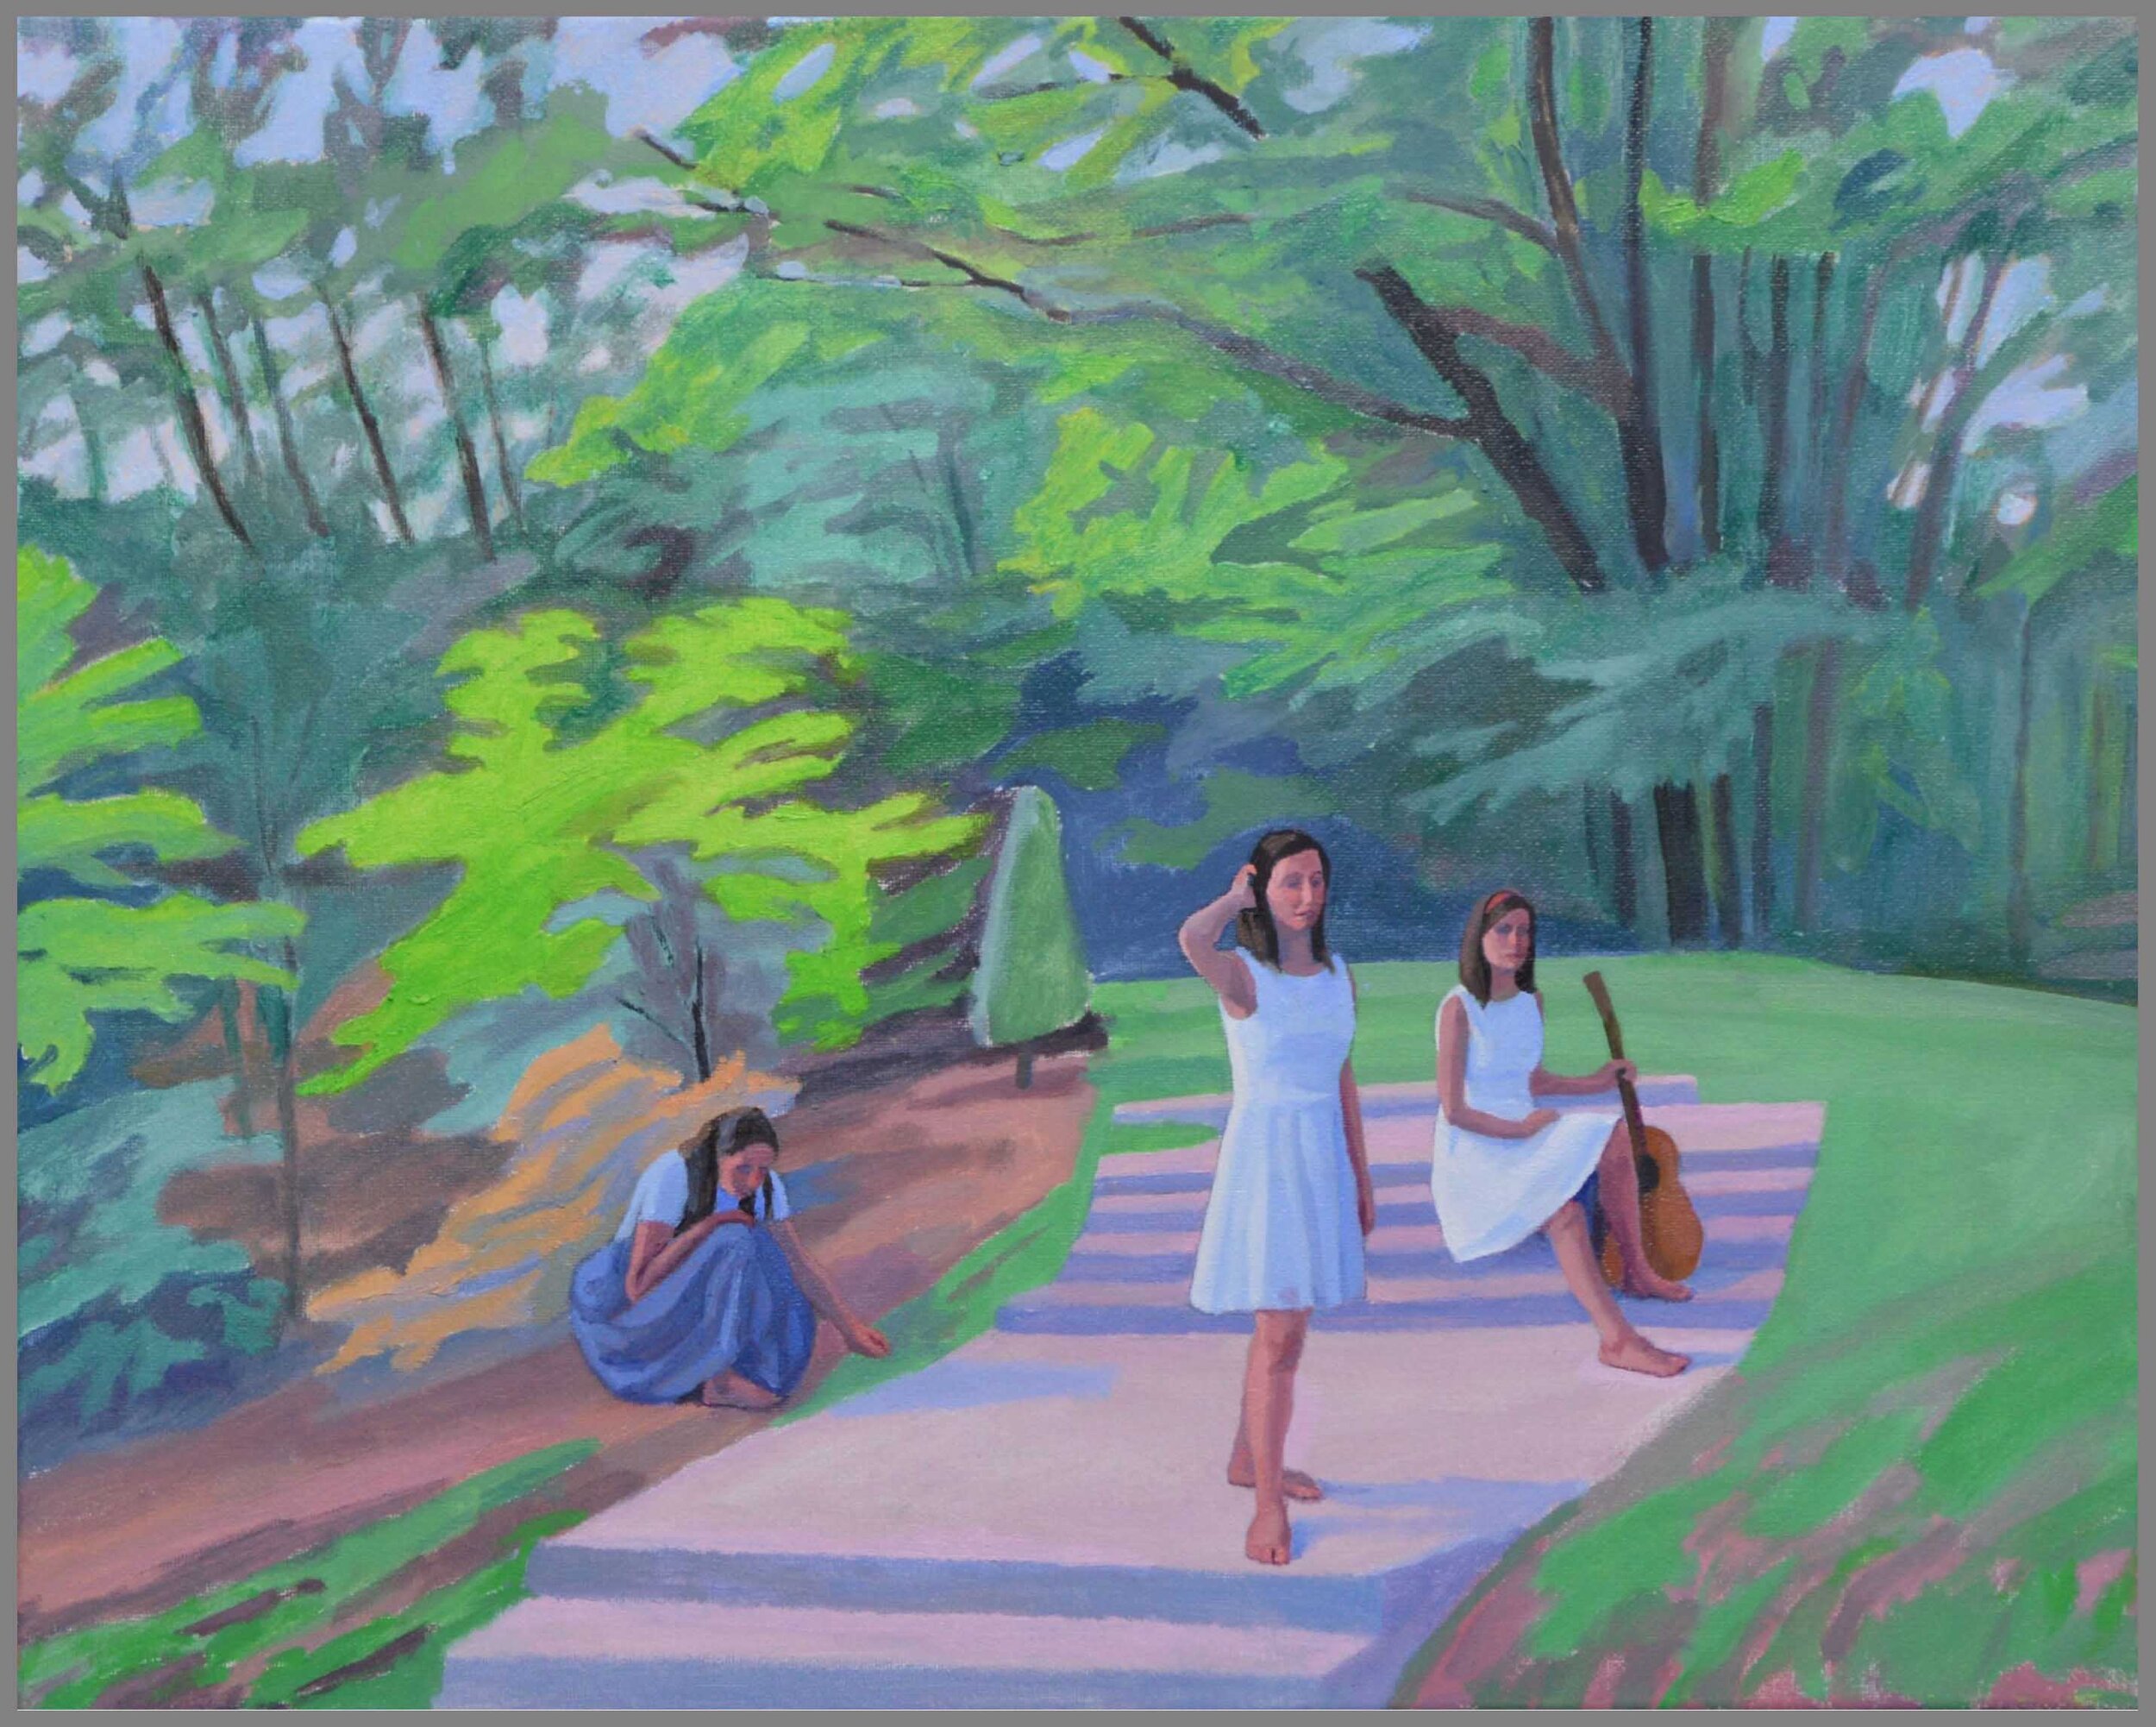 Three Graces in Highland Park-Autumn, oil/canvas, 16 x 20 inches